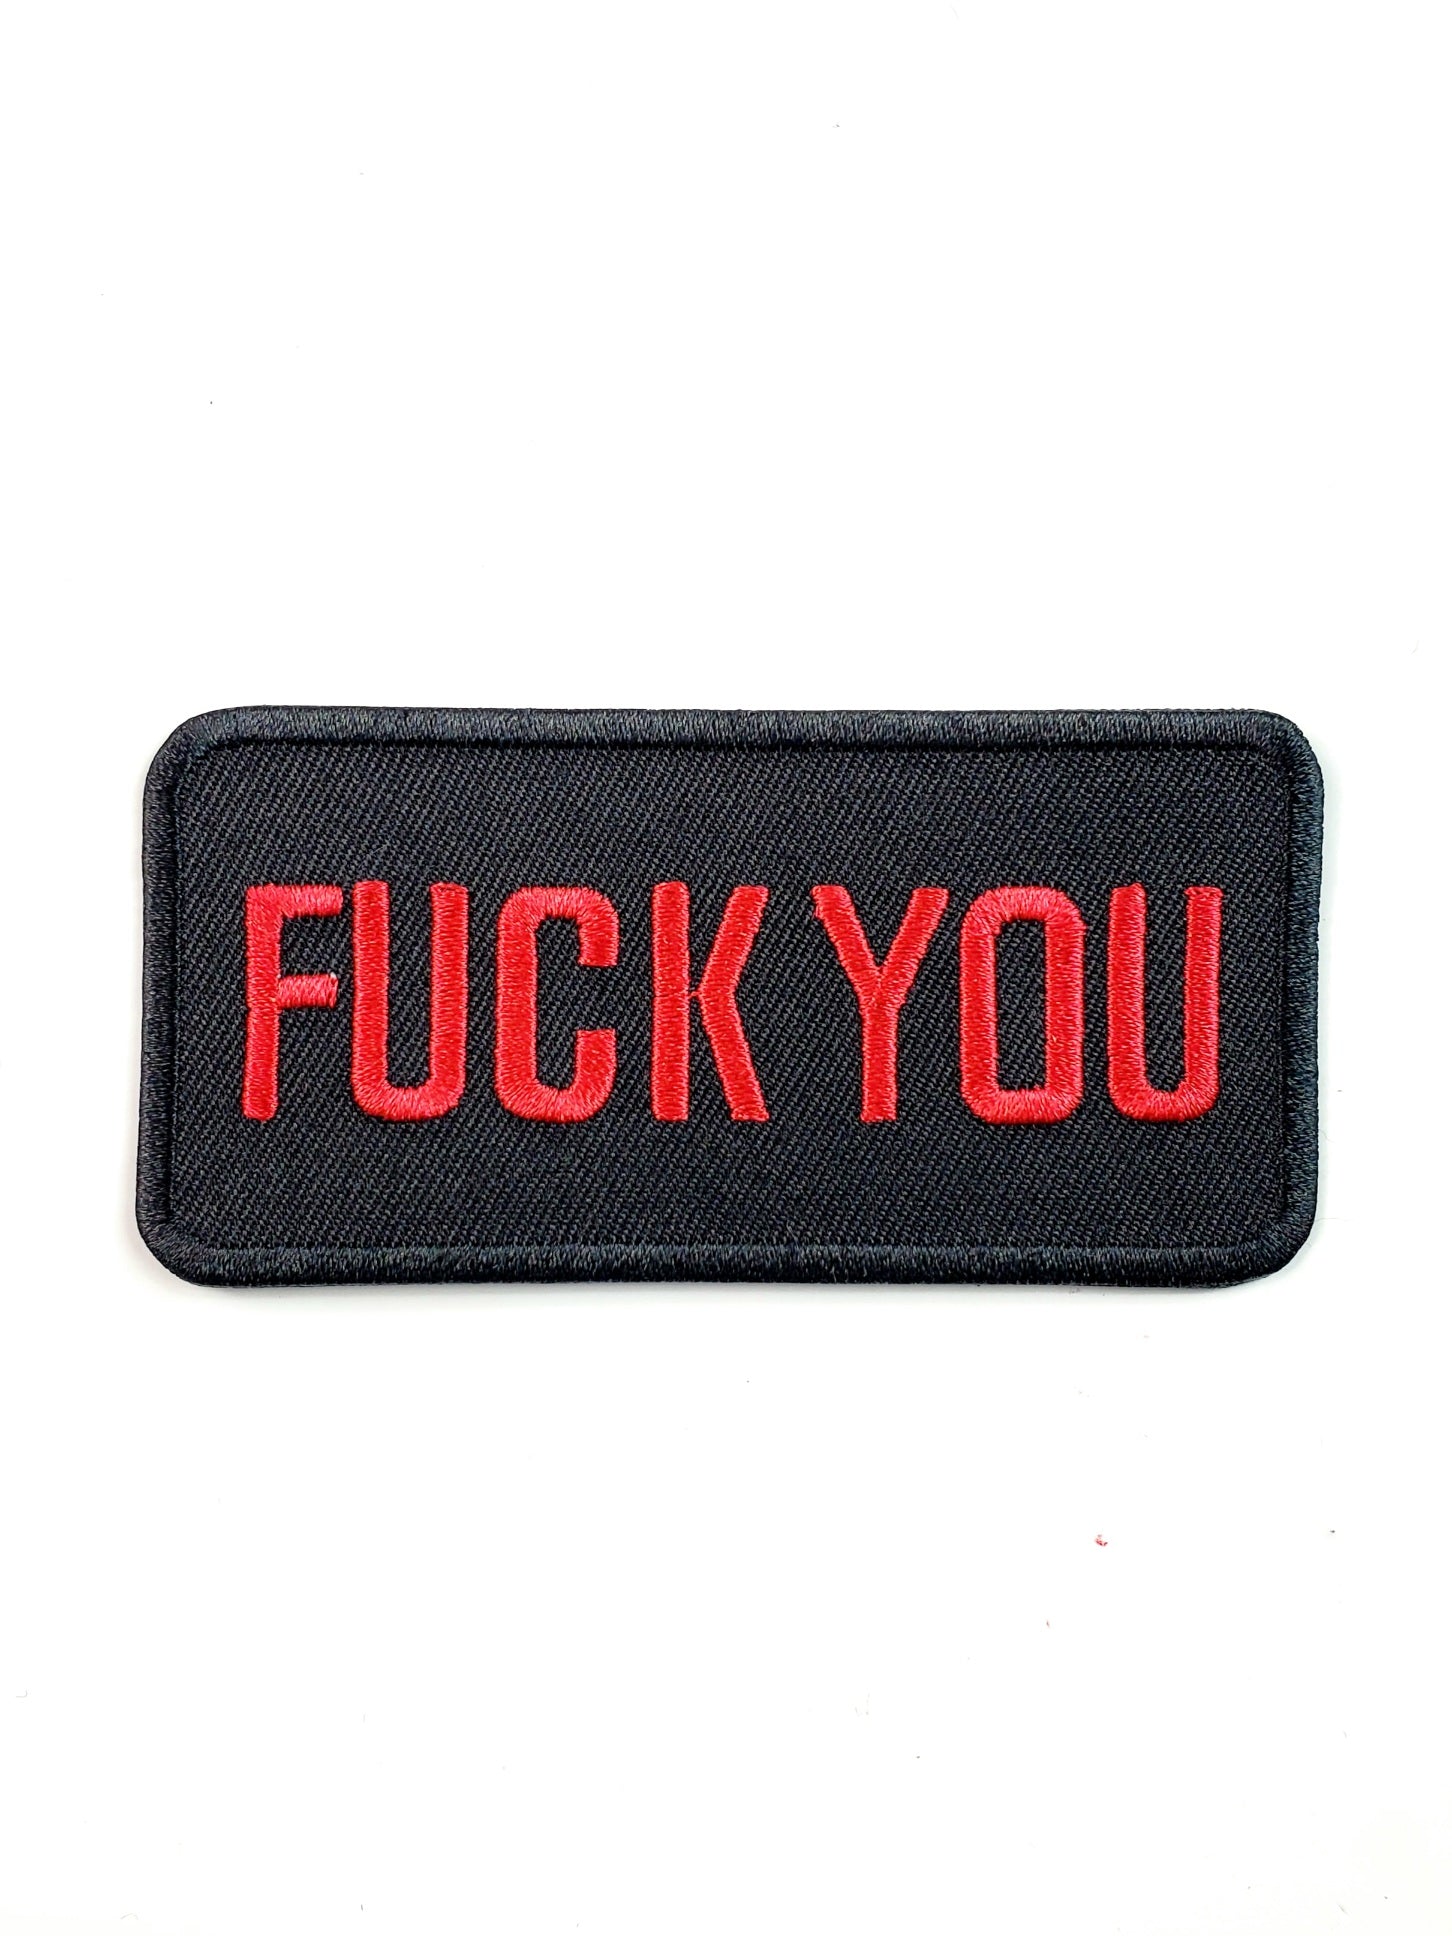 Red stitched "FUCK YOU" text on black canvas twill with black stitched edge rectangular embroidered patch